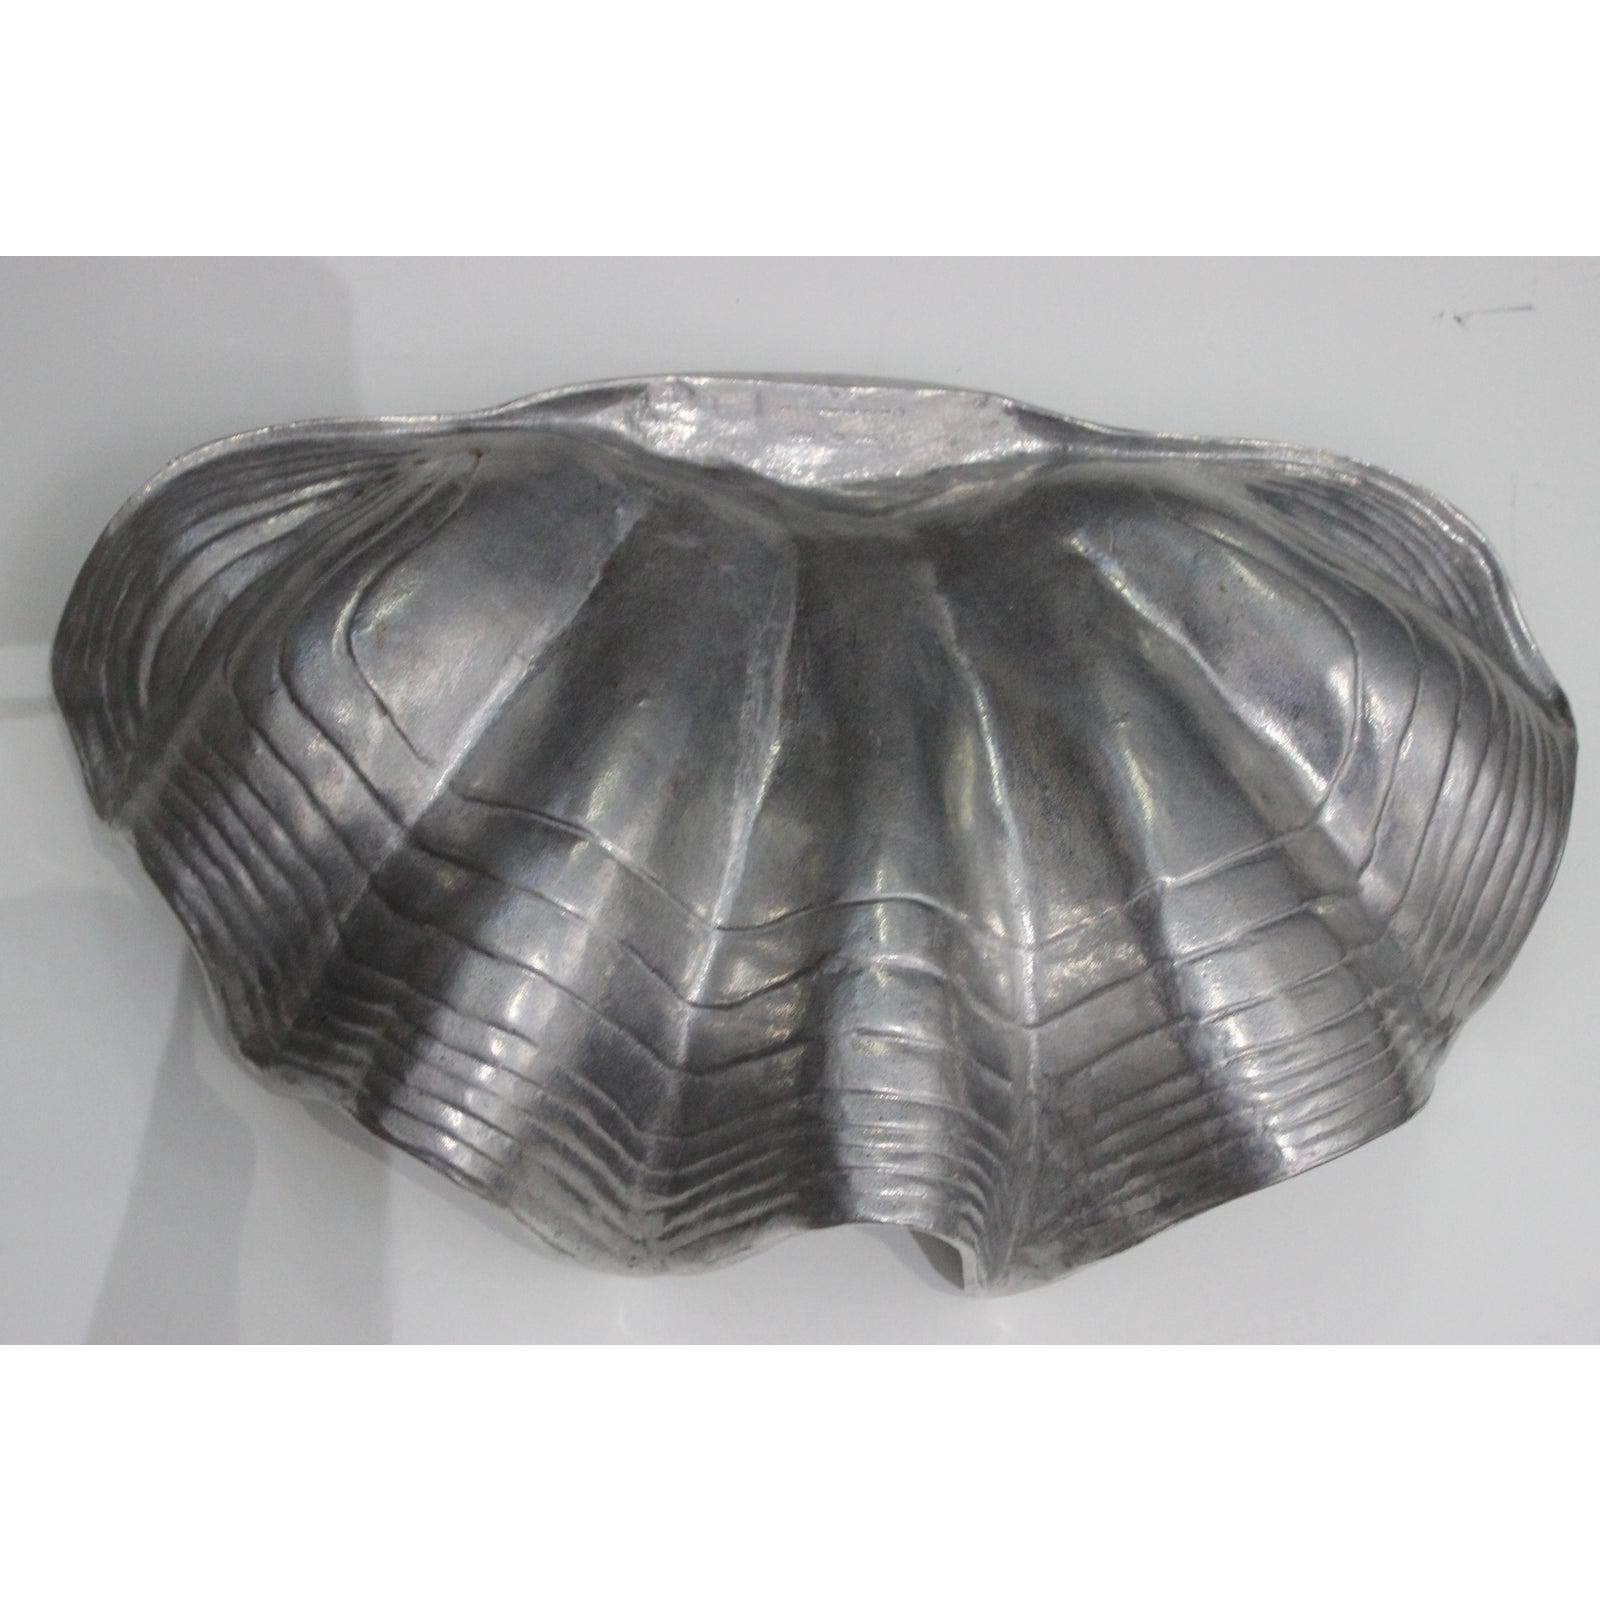 Metal Clam Shell Serving Dish